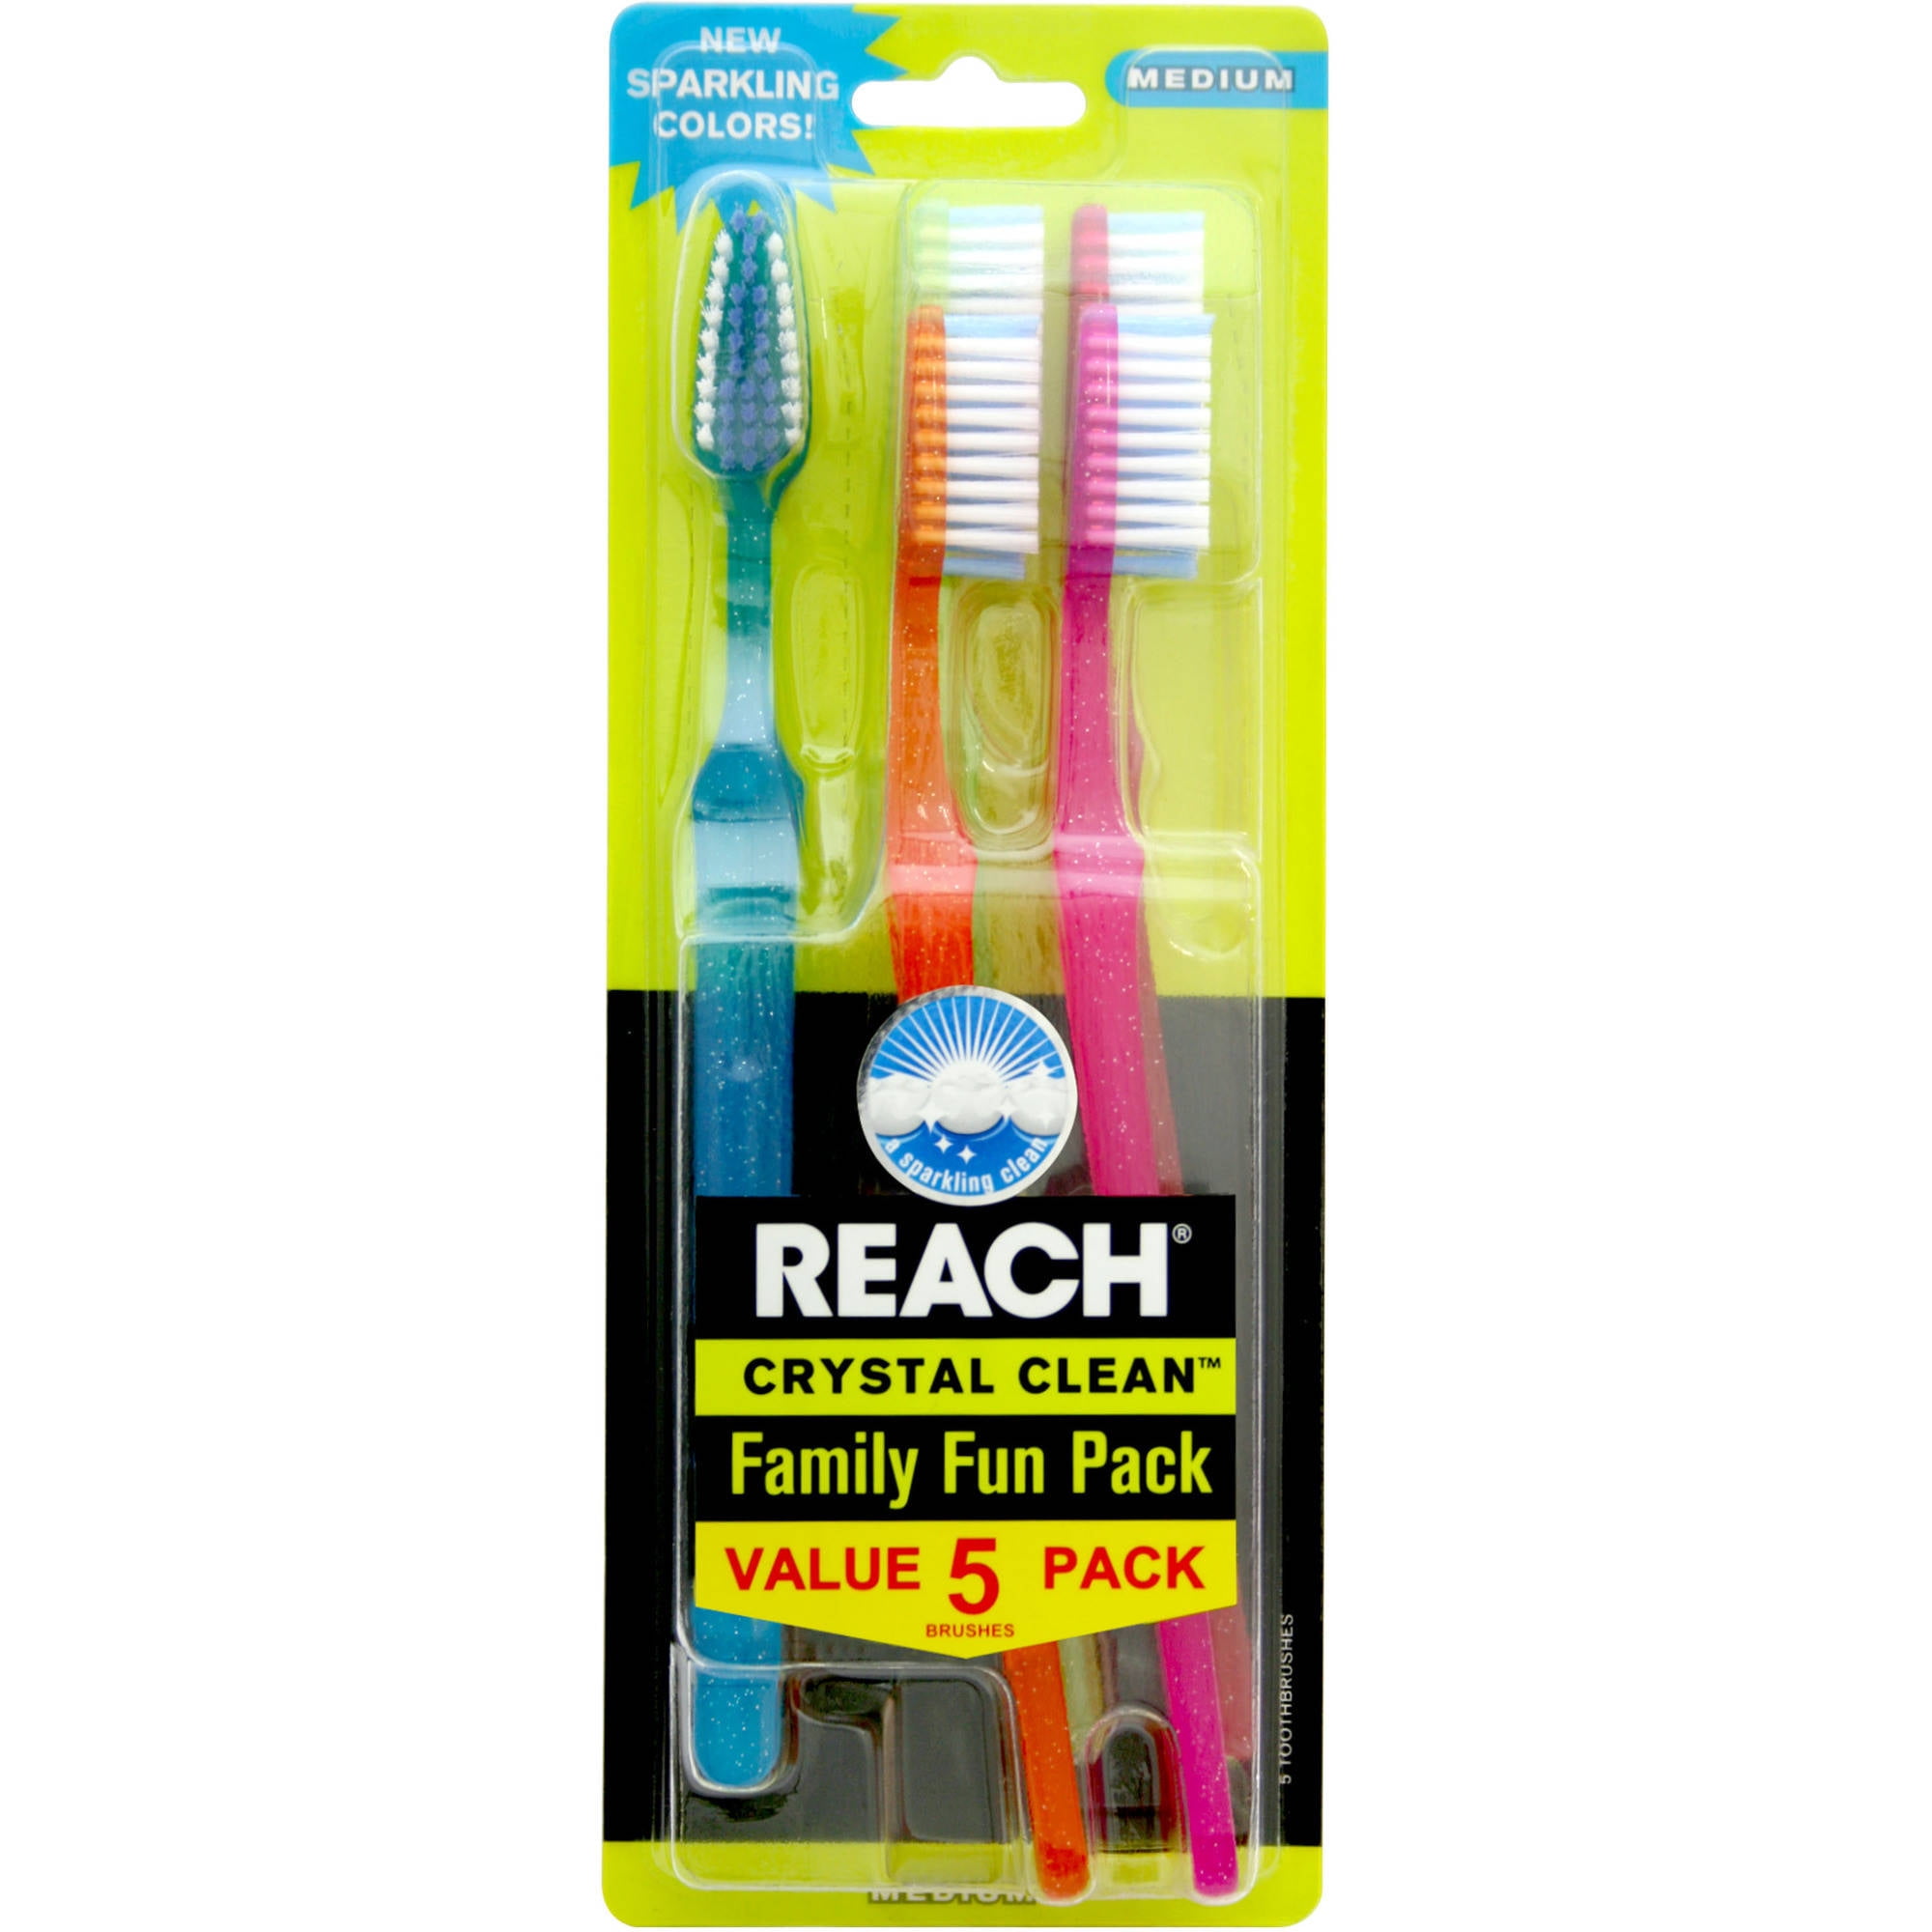 24 Pcs NEW REACH CRYSTAL CLEAN TOOTHBRUSHES MEDIUM FULL HEAD MADE IN USA ITEM 